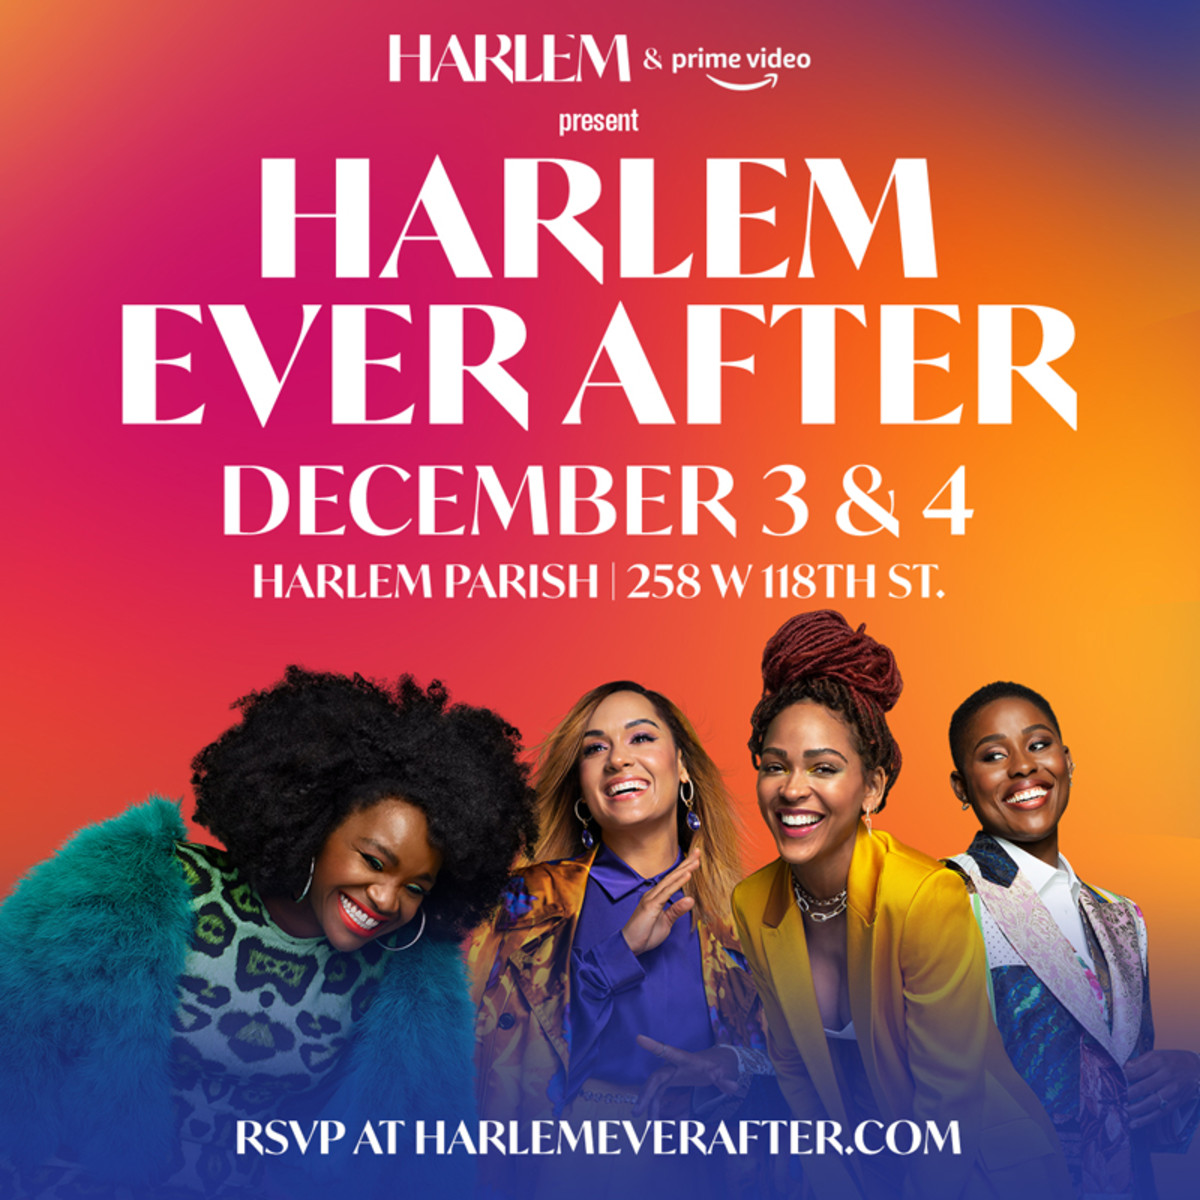 On Dec. 3rd and 4th at the historic Harlem Parish on W. 118 Street, Prime Video’s "Harlem Ever After” event will feature Black female creators and entrepreneurs, celebrate sisterhood, and pay homage to the beloved neighborhood.